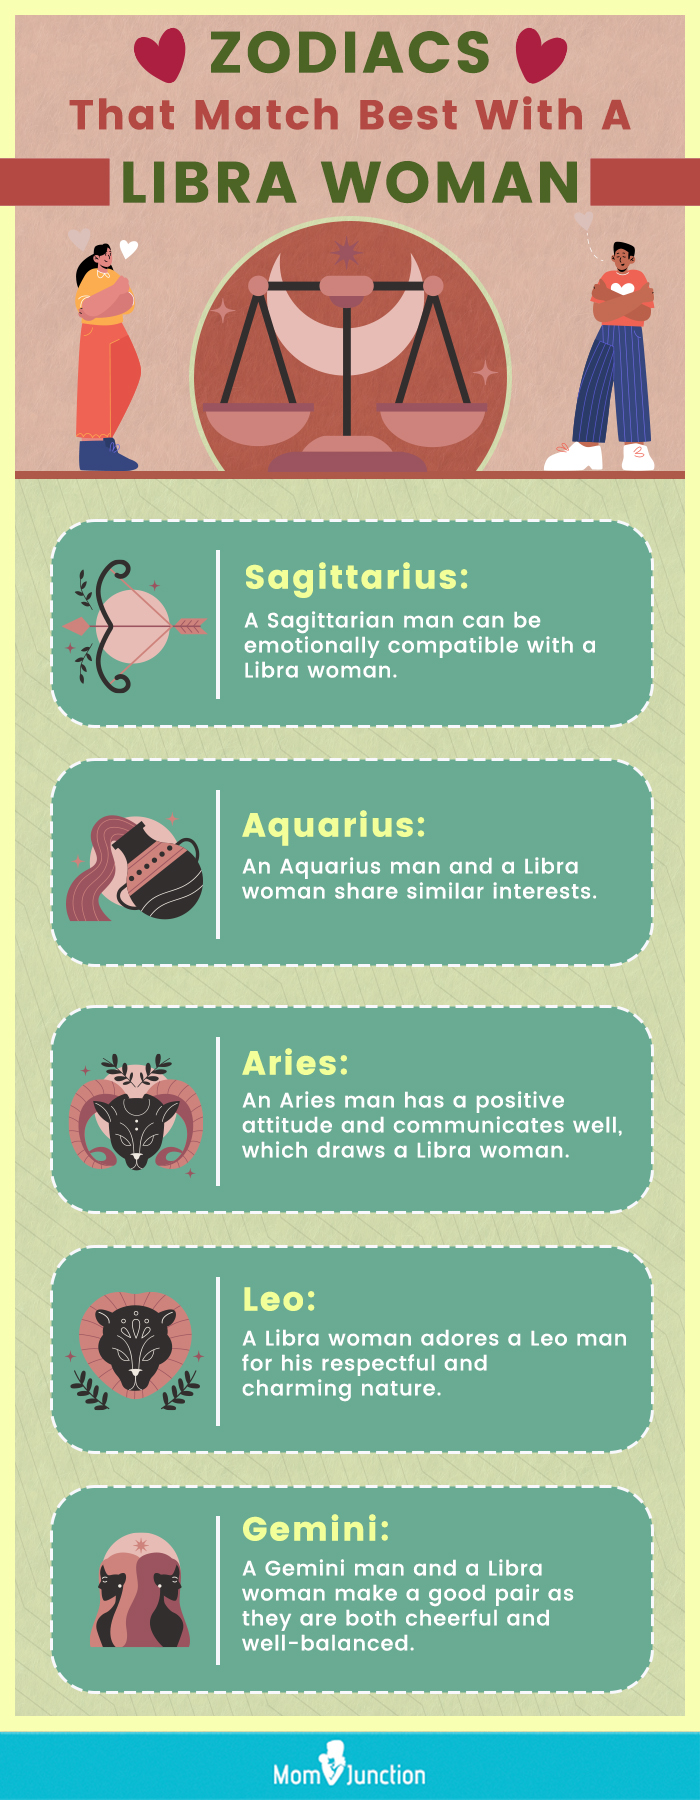 zodiacs that match best with a libra woman (infographic)